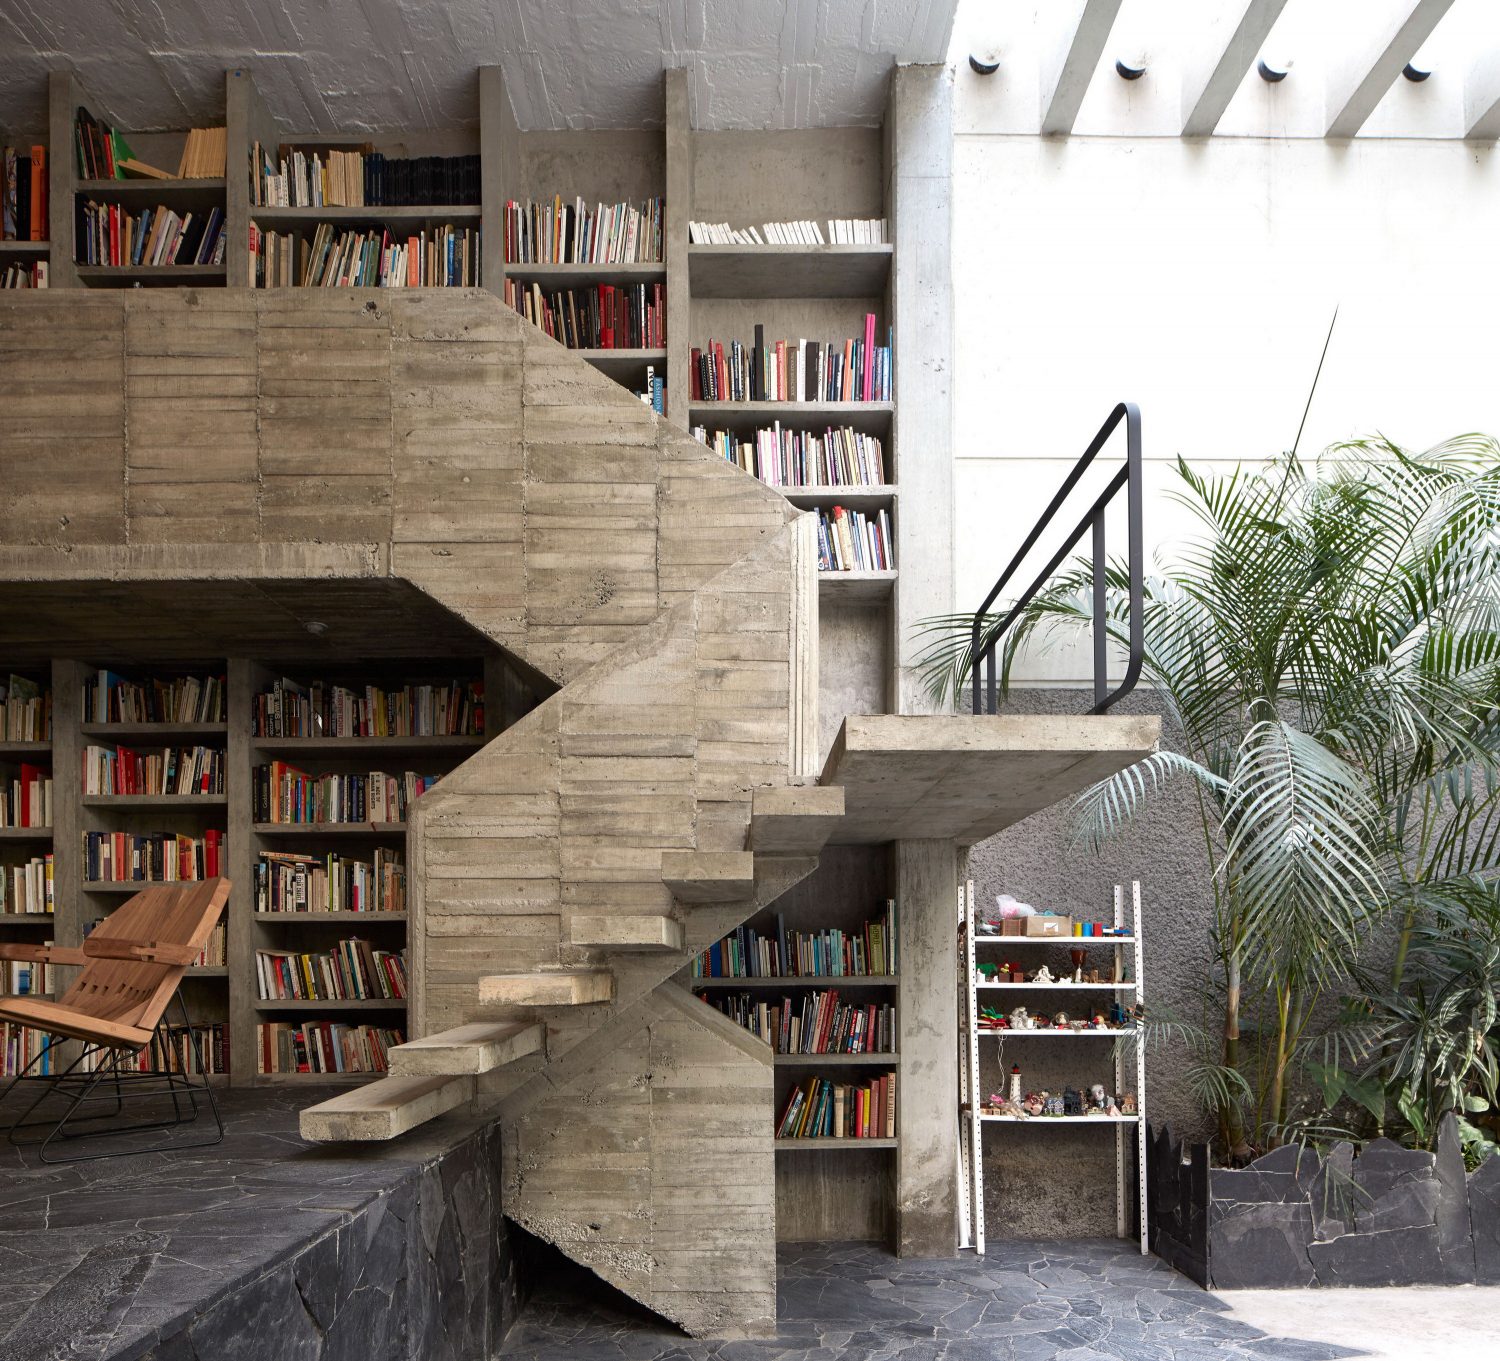 The Reyes House by Pedro Reyes and Carla Fernandez